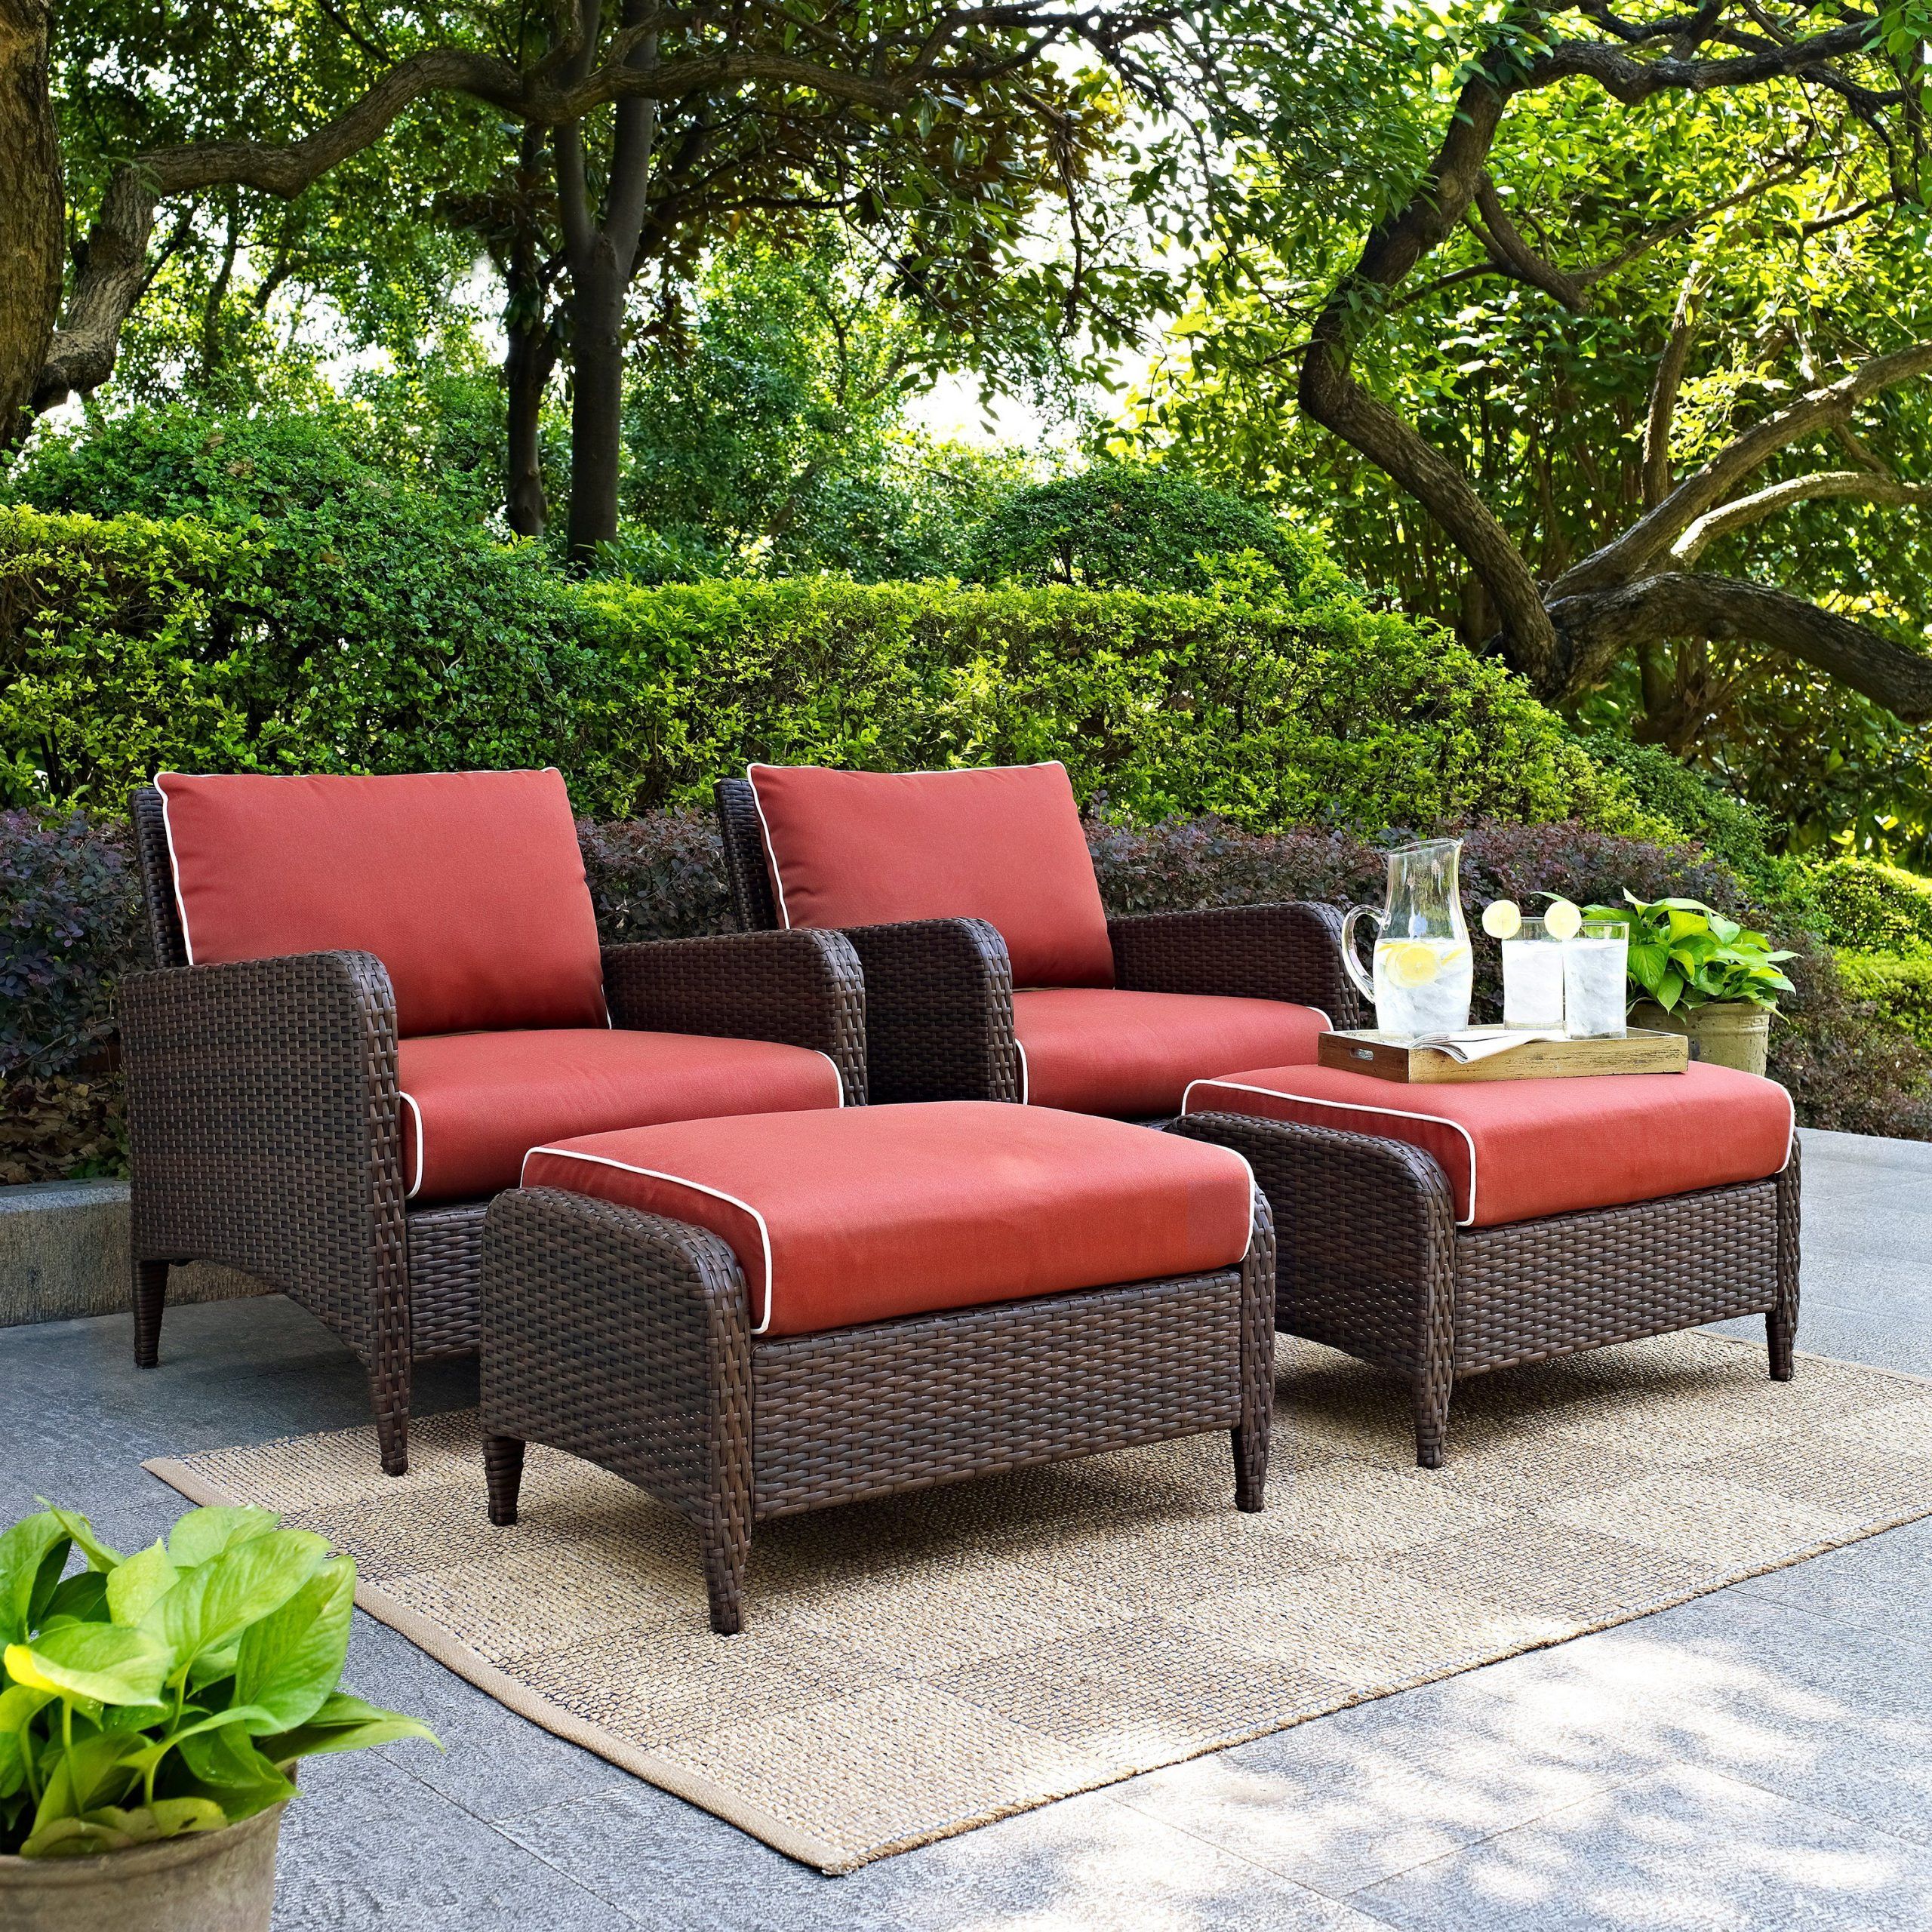 Most Up To Date Sangria 4 Piece Wicker Outdoor Patio Furniture Set – Kiawah In 2020 Intended For 4 Piece Wicker Outdoor Seating Sets (View 2 of 15)